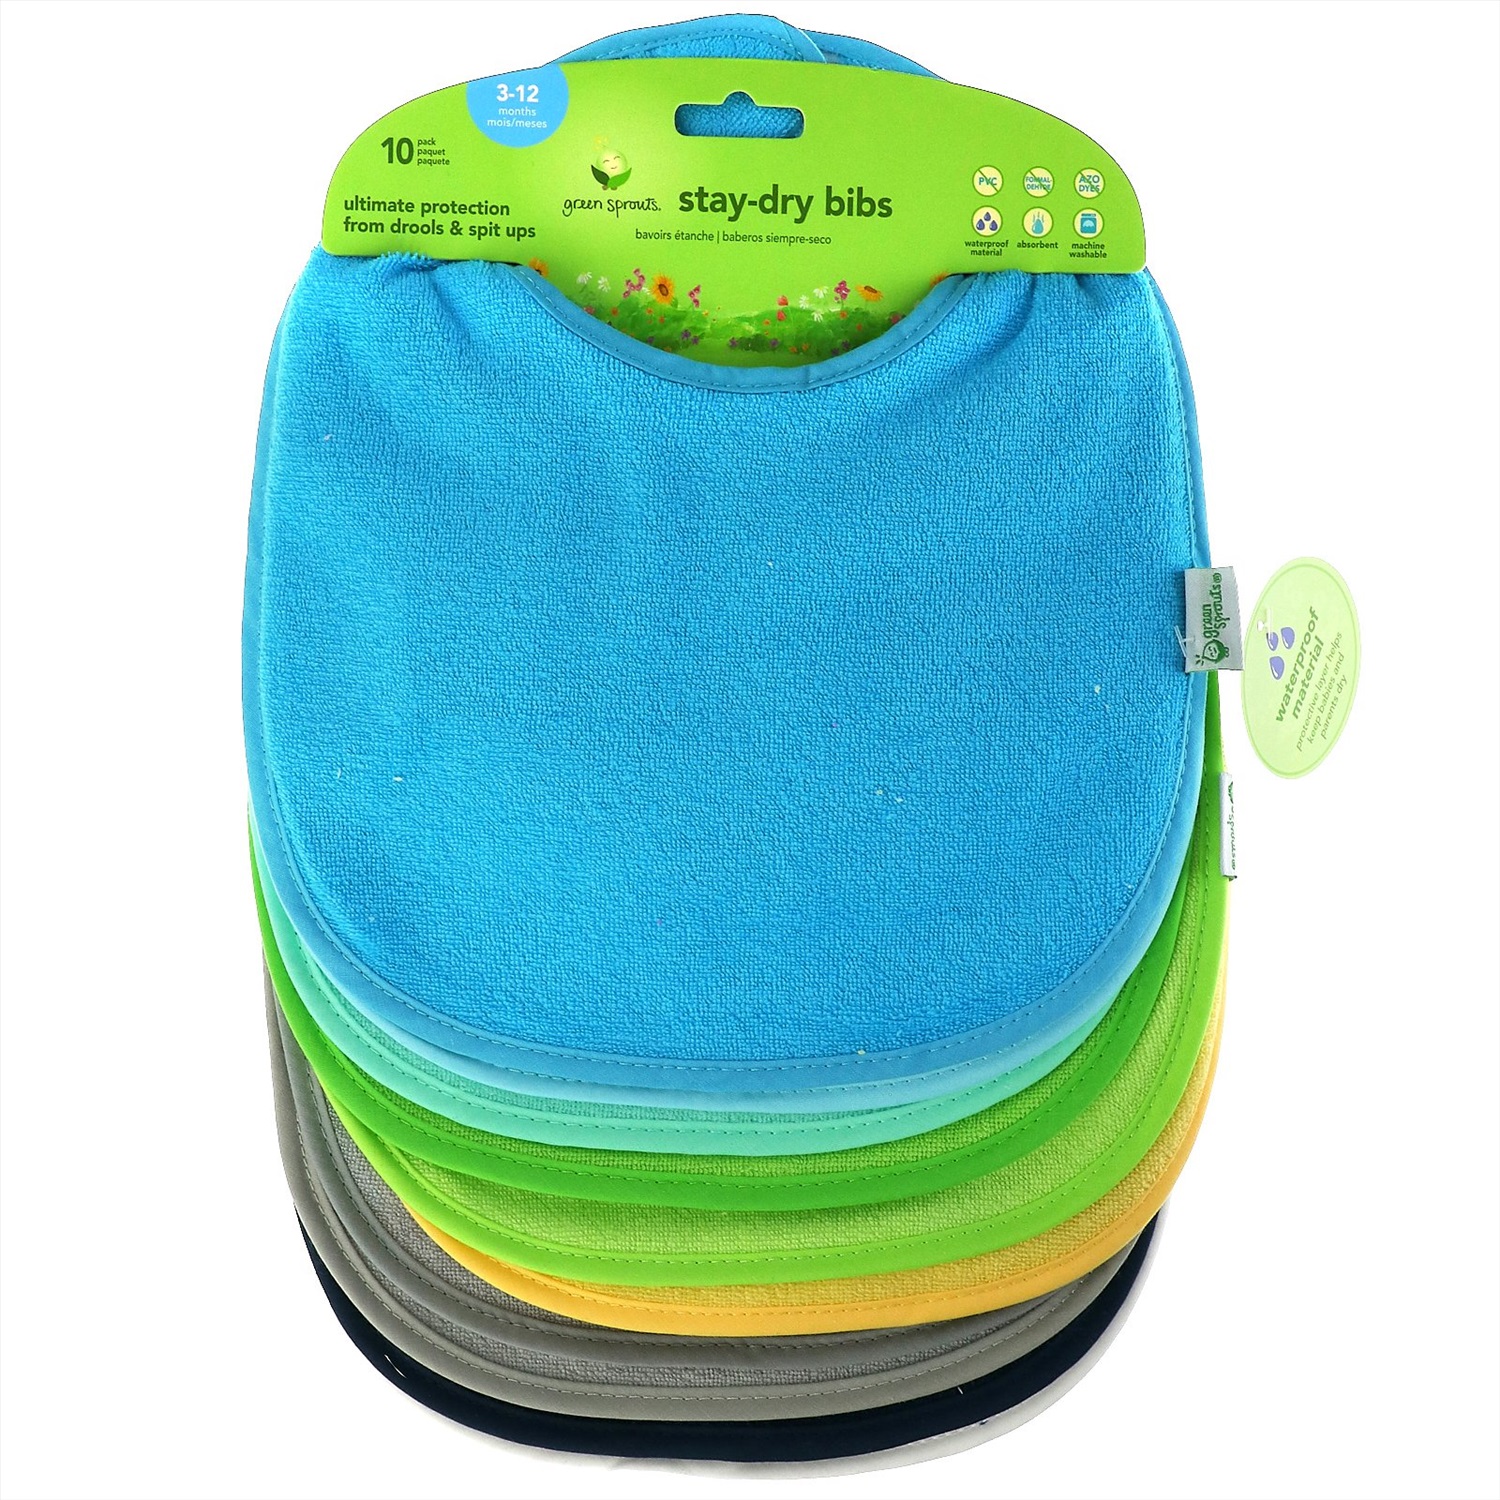 Green Sprouts Waterproof Bibs: Are They Really Keeping Your Baby Dry